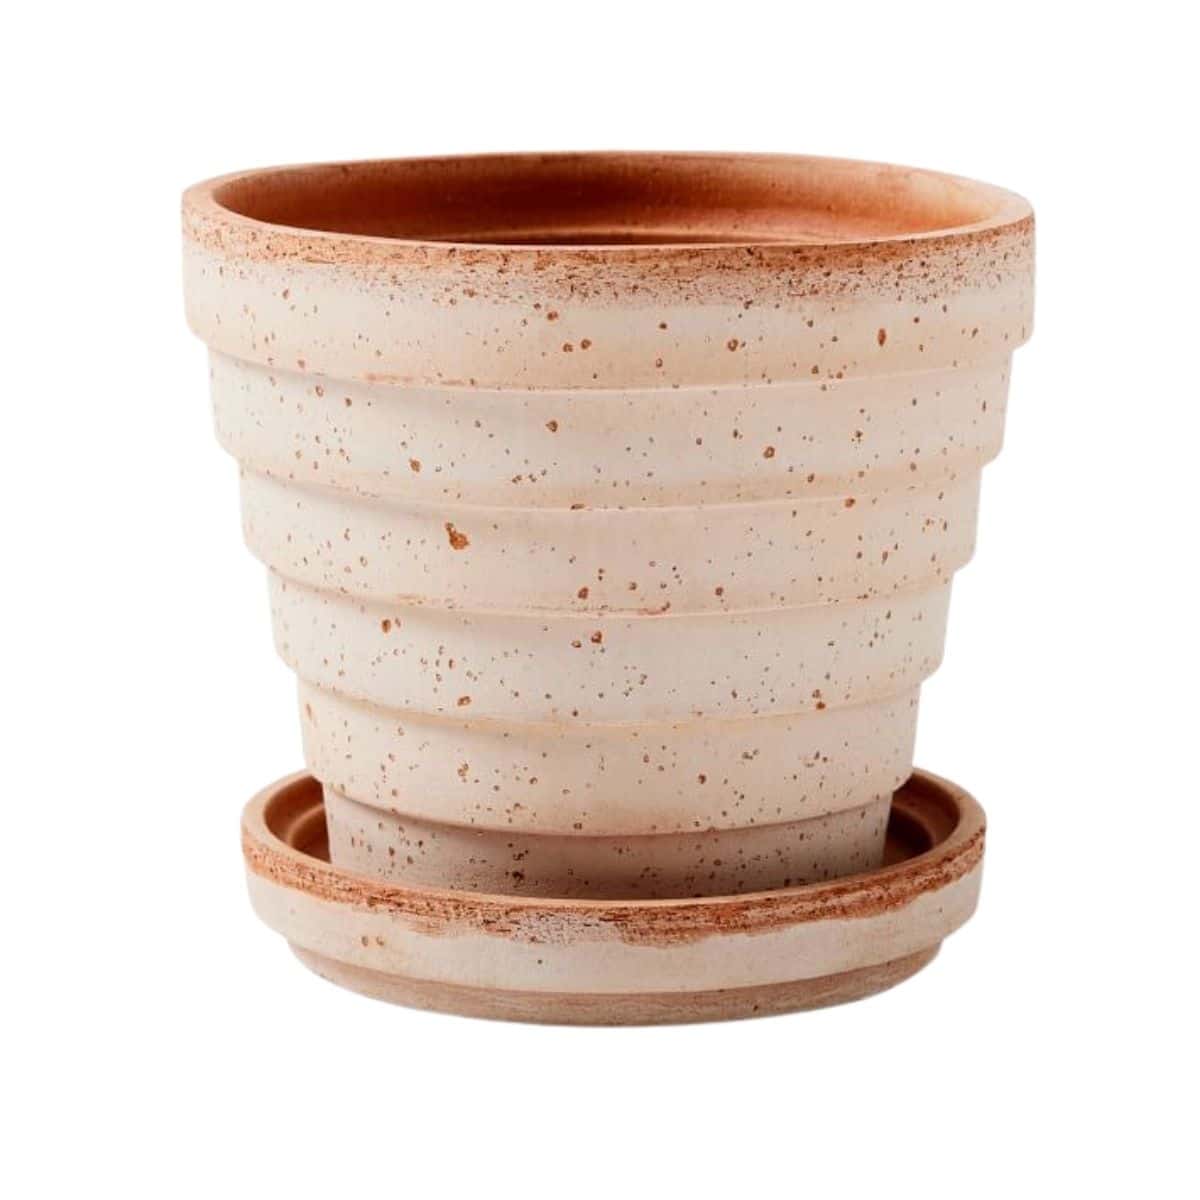 Terra cotta planter pot with saucer from West Elm.